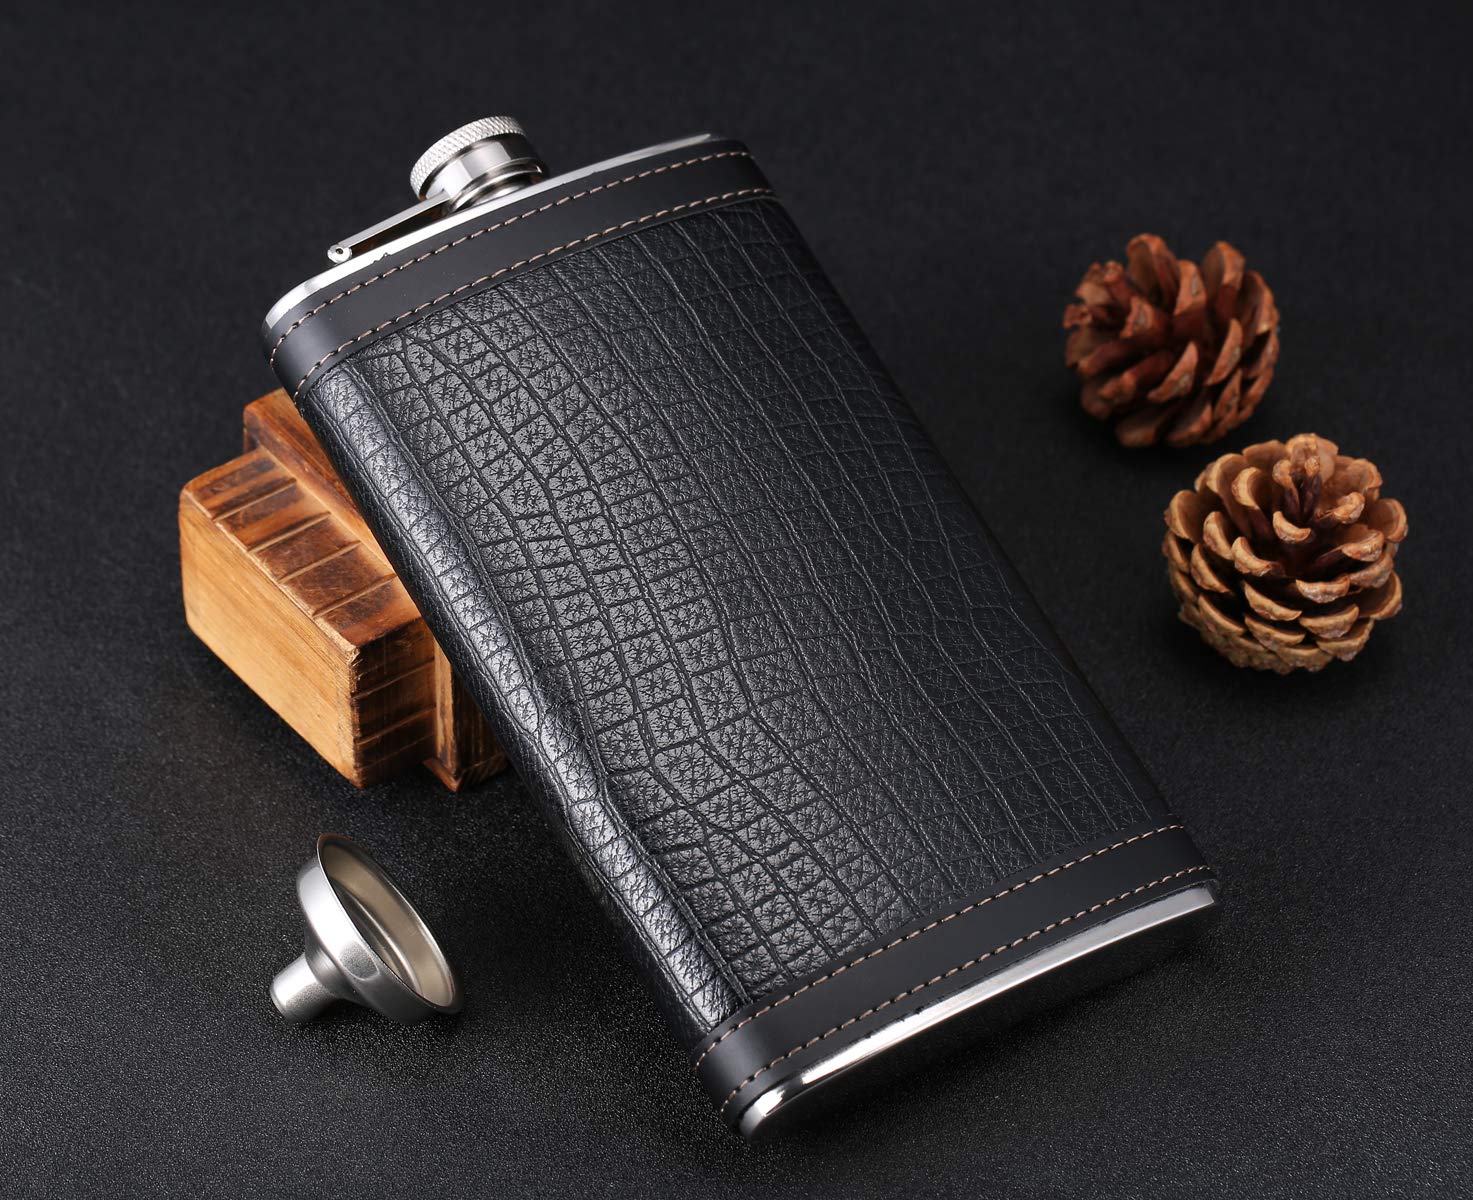 TOX TANEAXON 12 oz Pocket Black Whiskey Liquor Leather Wrapped Flask with Funnel and Premium Box - Stainless steel and Leak Proof